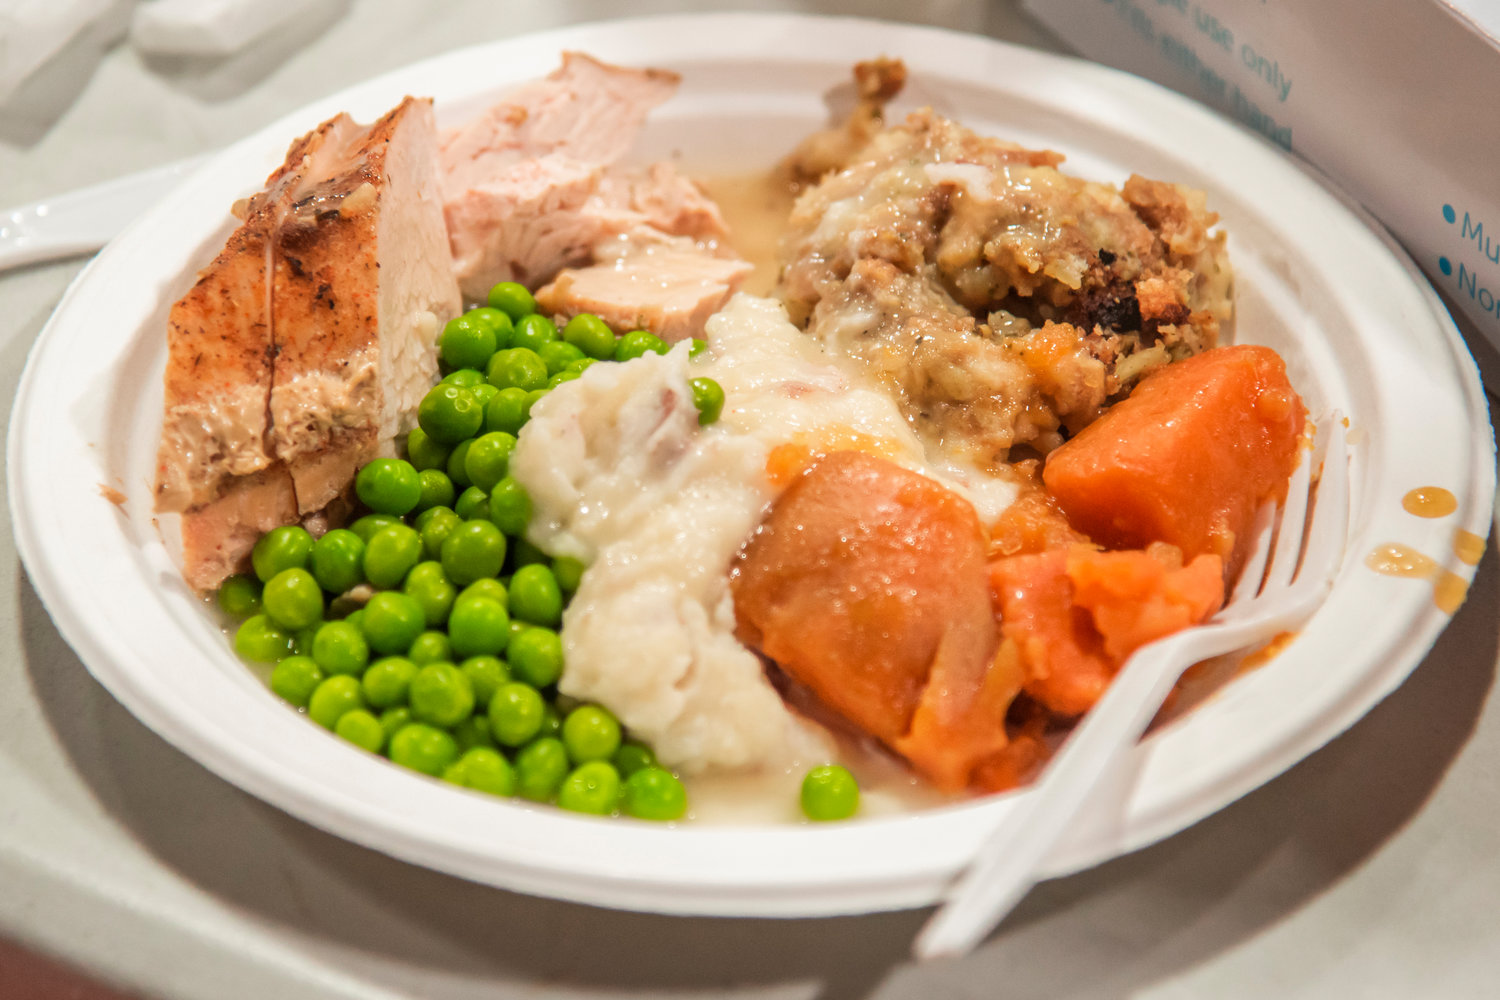 Over 250 meals were served at the Centralia Community Church of God on Thanksgiving including over 100 drive up meals, 37 boxed meals delivered to a homeless encampment, and various other boxes delivered across the county.